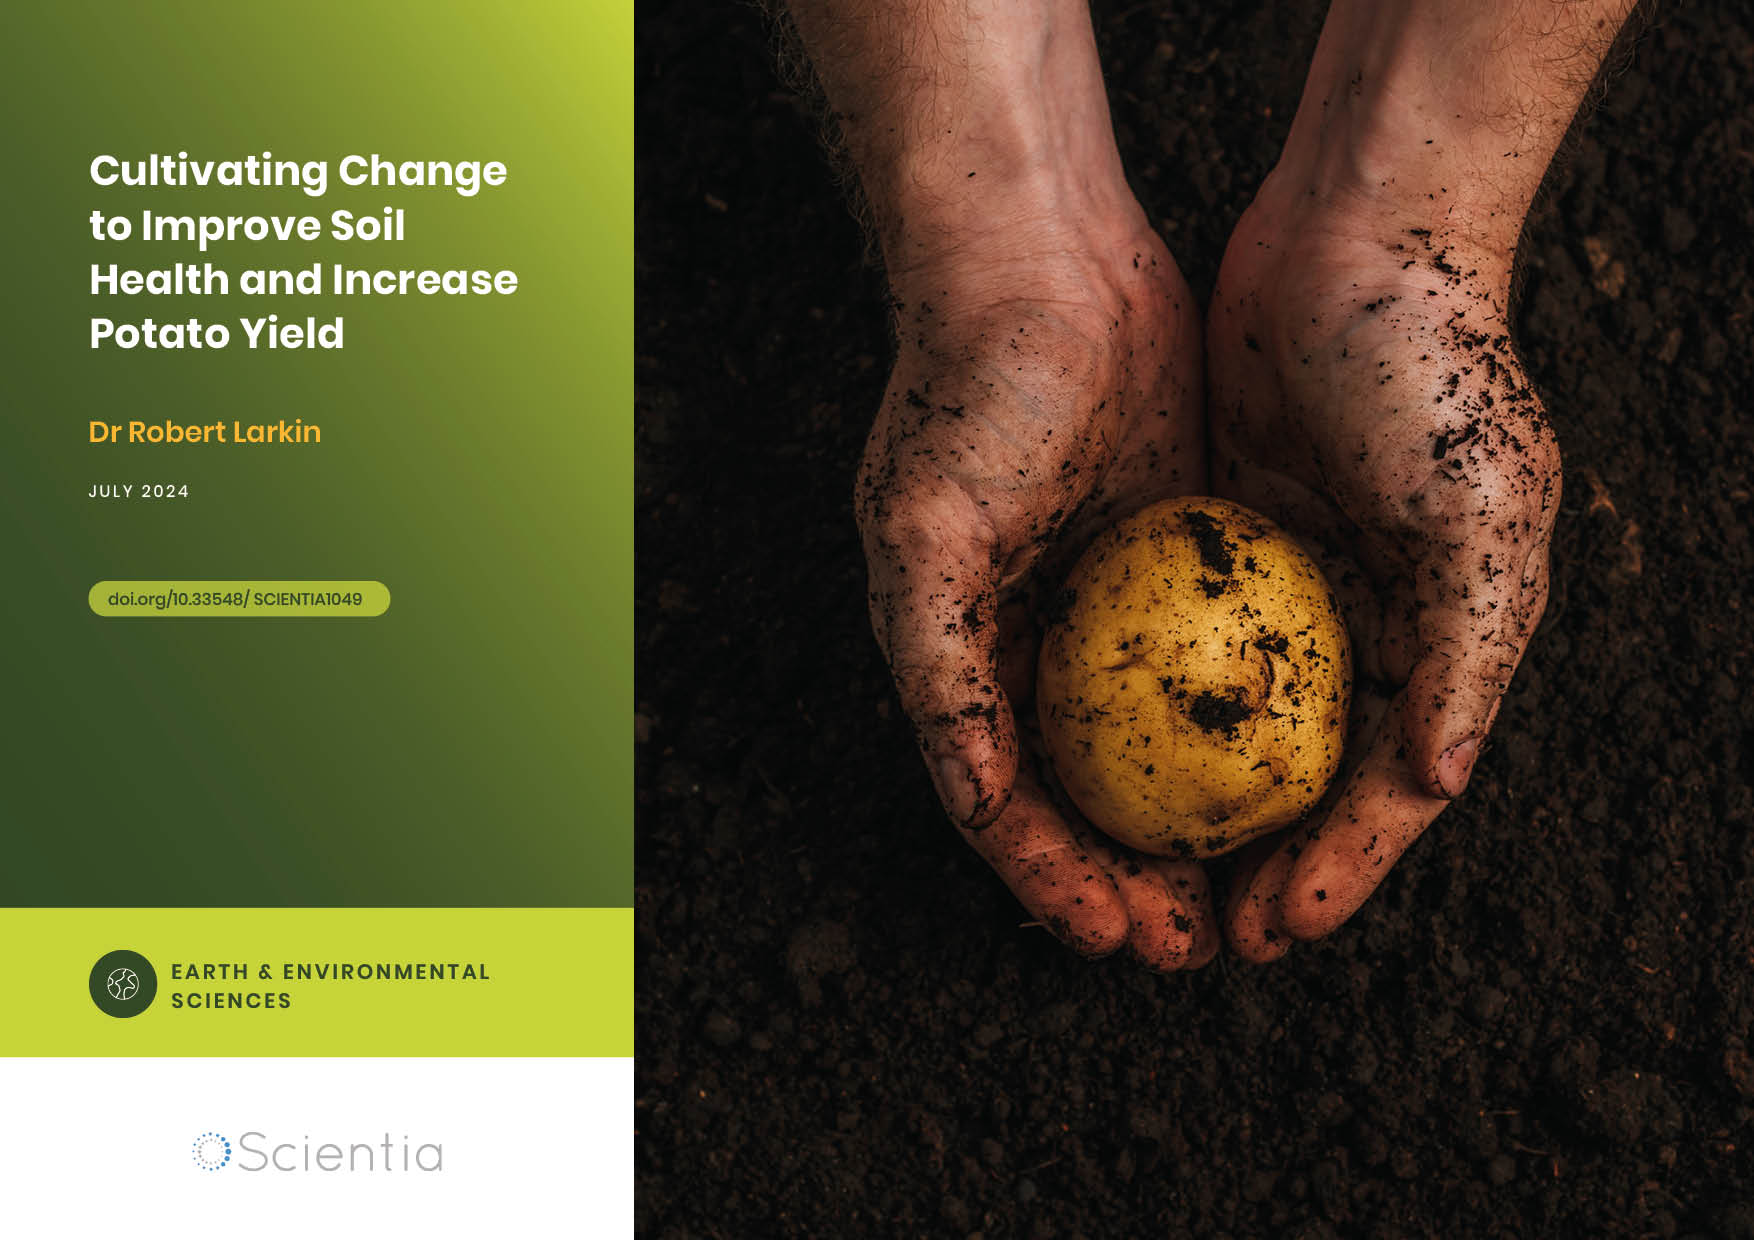 Dr Robert Larkin | Cultivating Change to Improve Soil Health and Increase Potato Yield